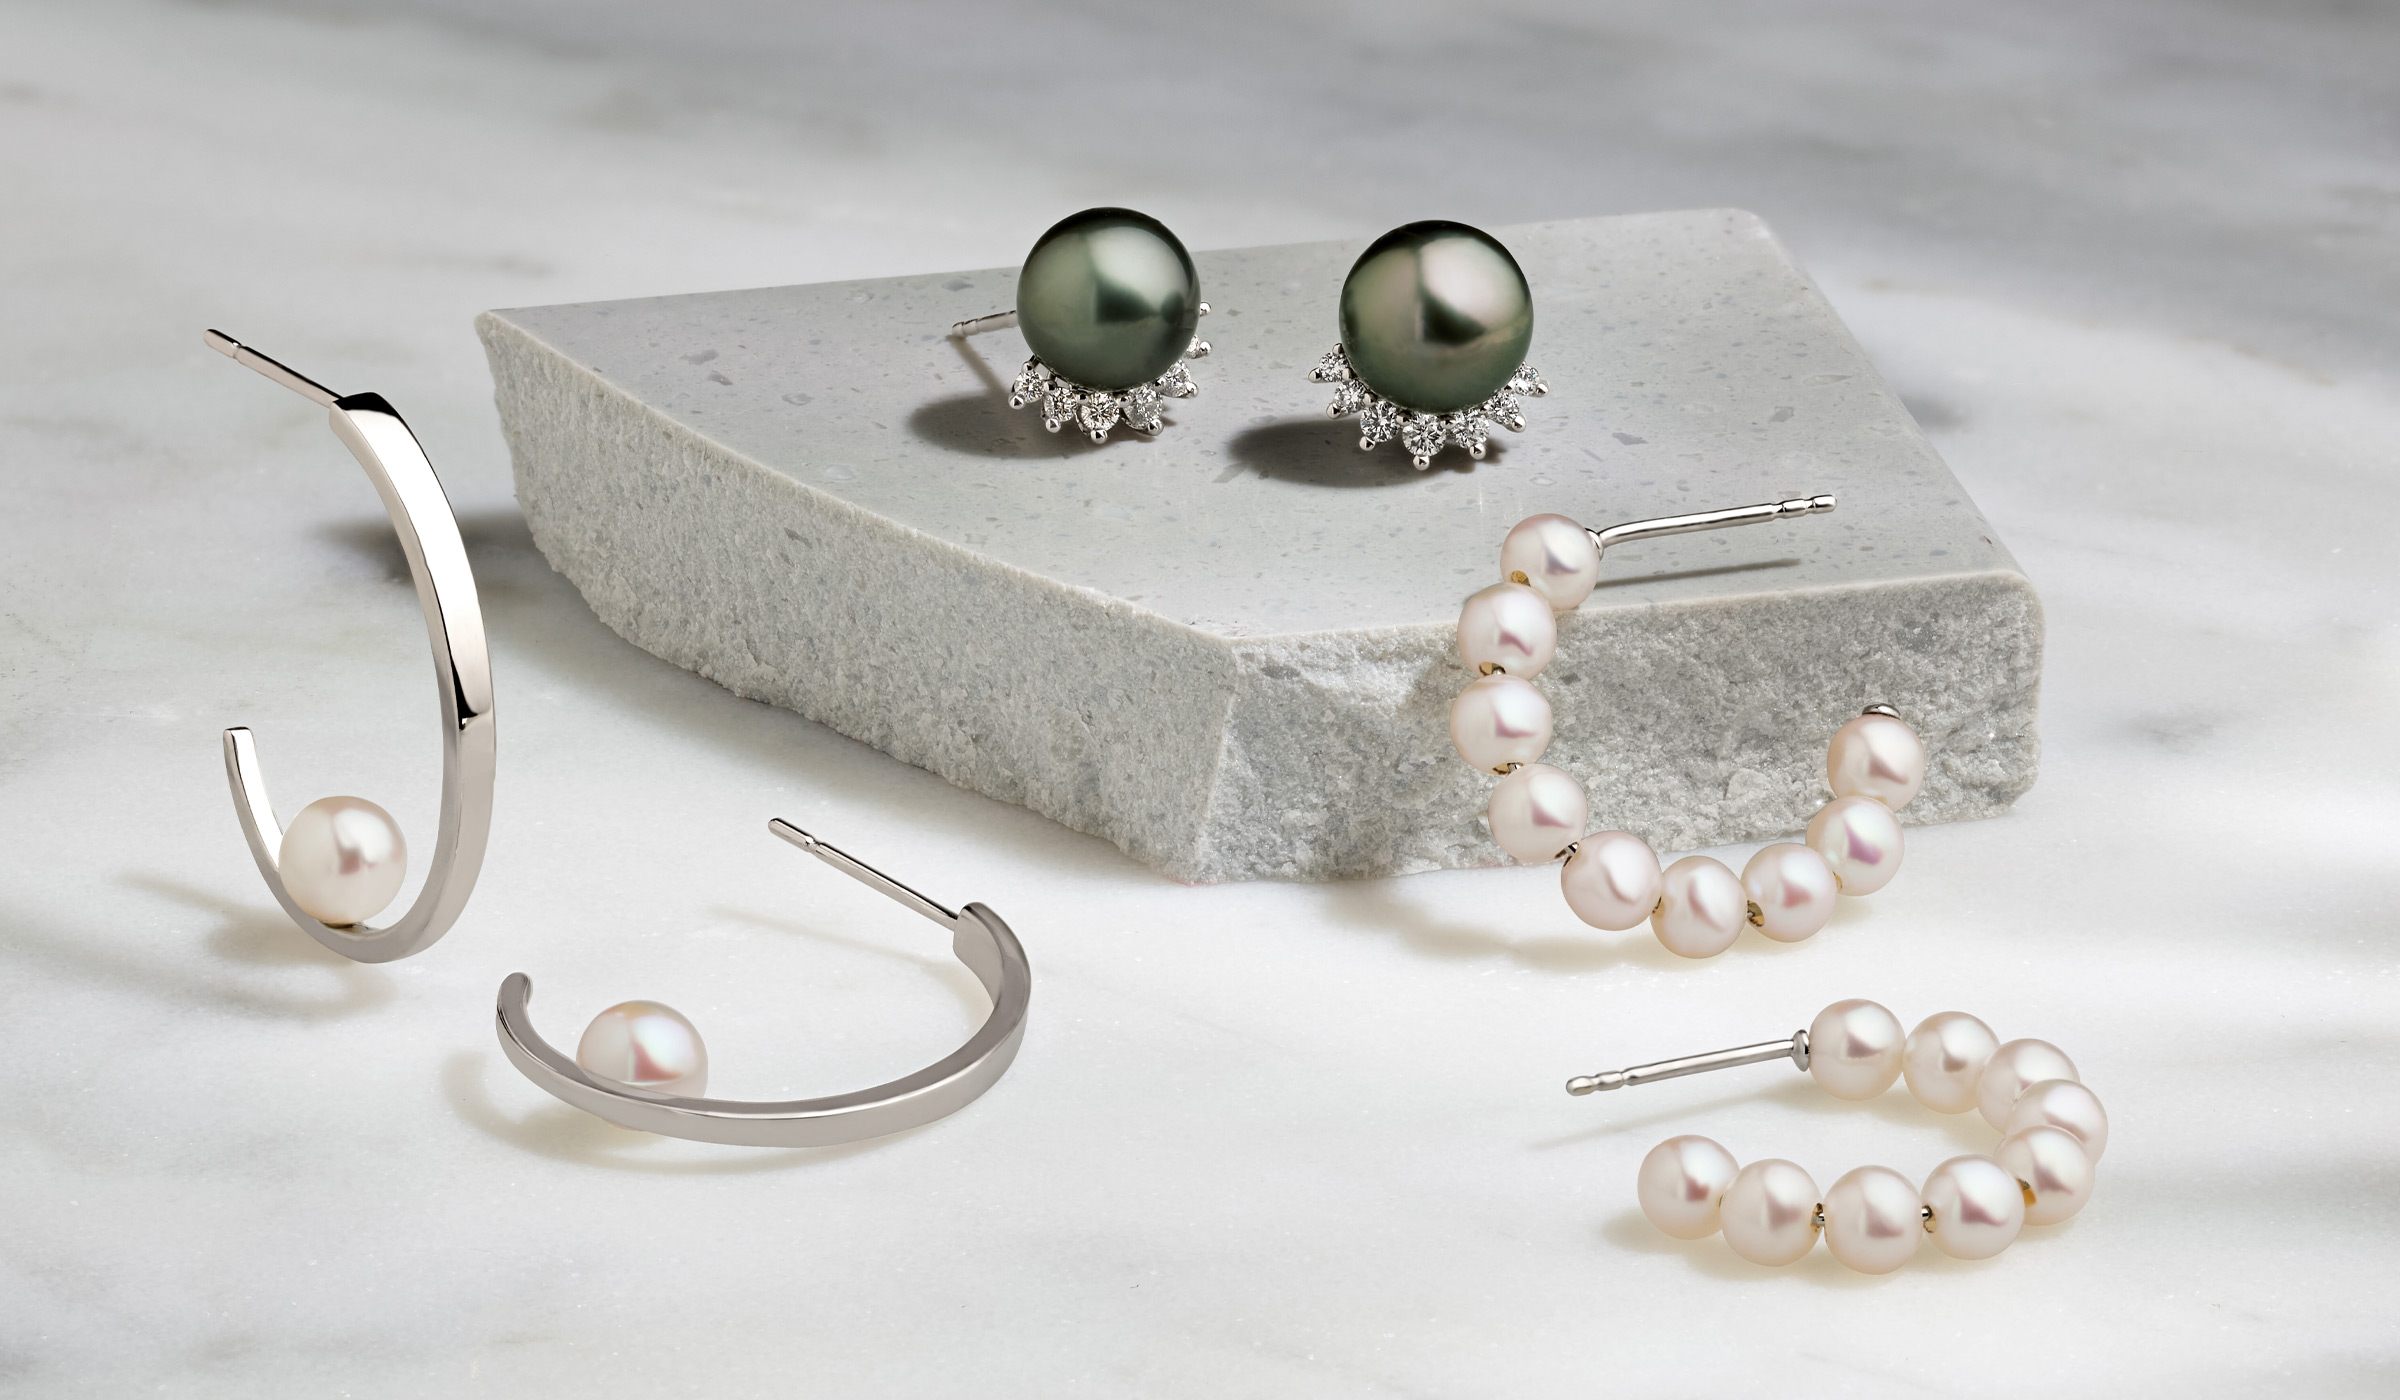 Pearl Accessories To Go With Any Look